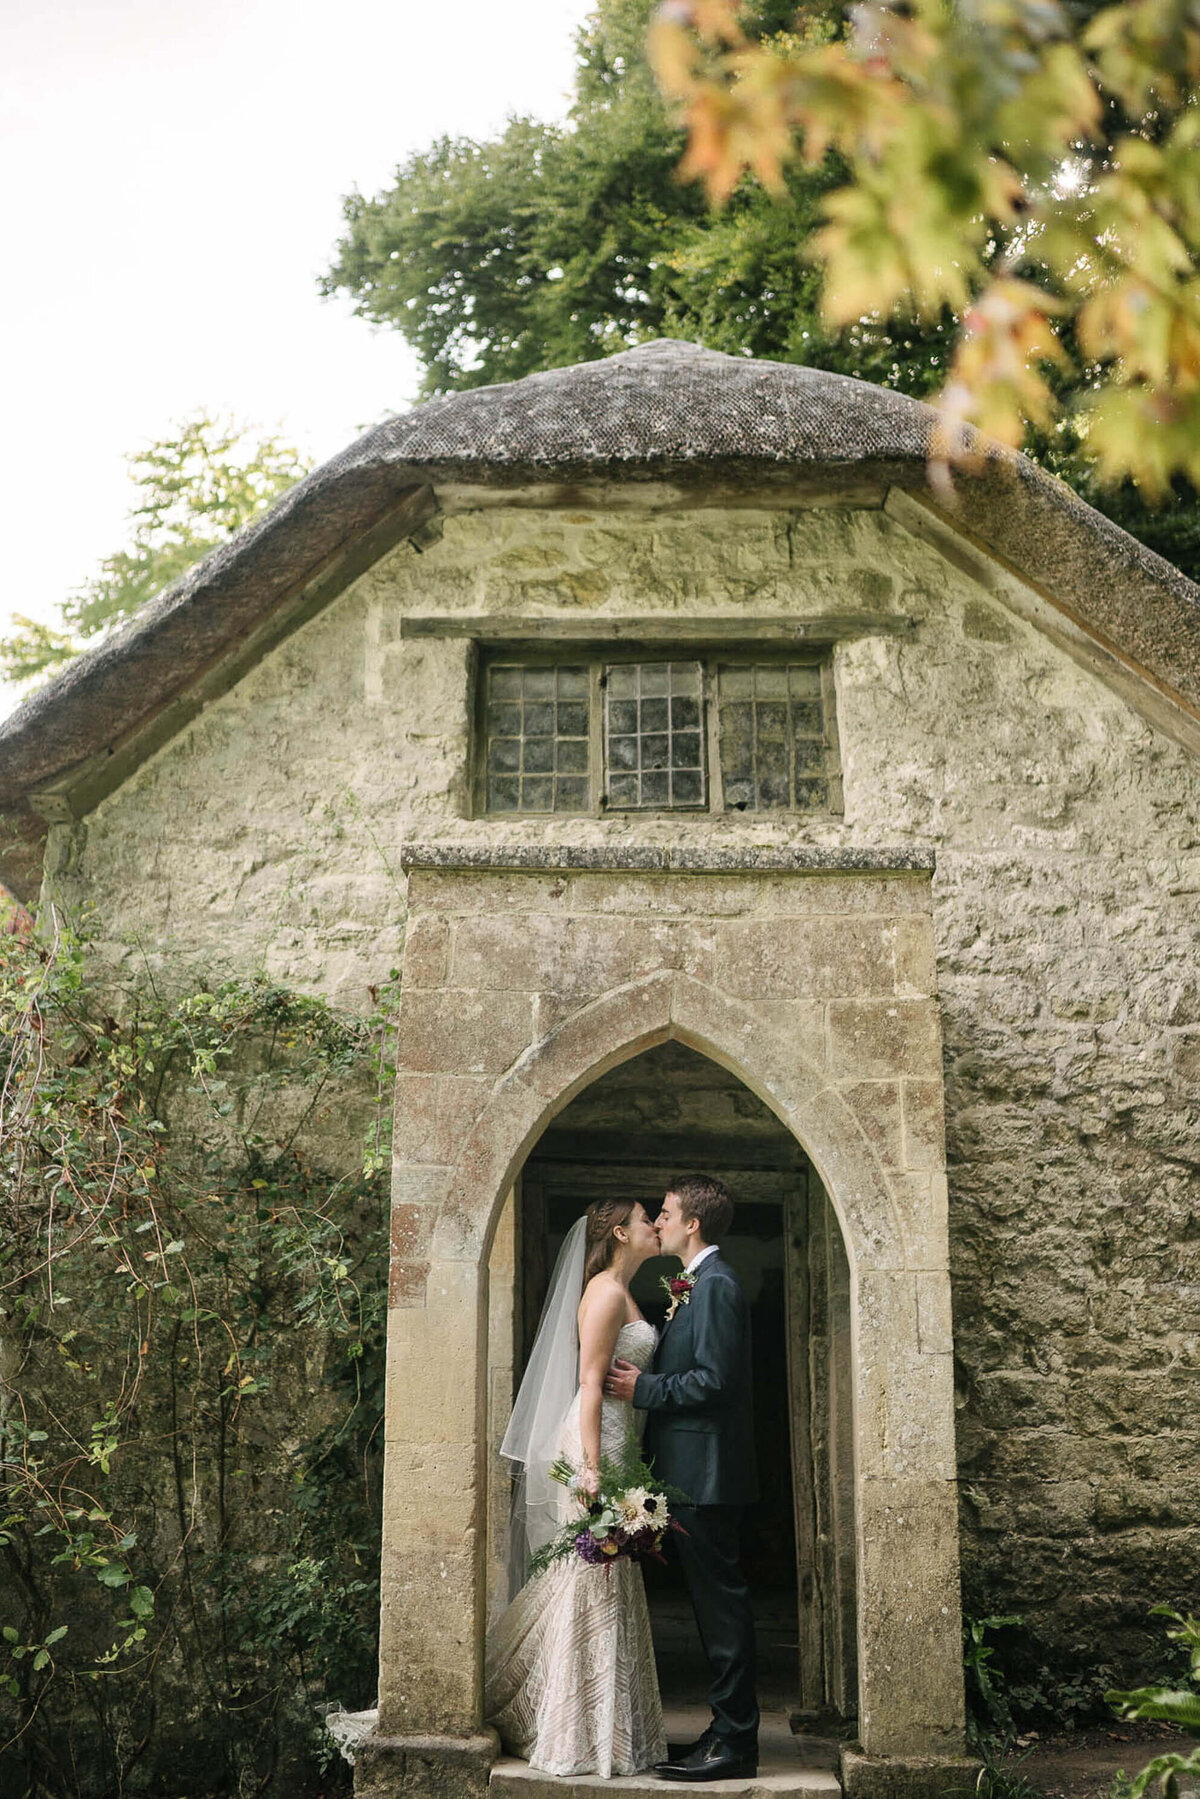 A bride and groom kissing in a doorway